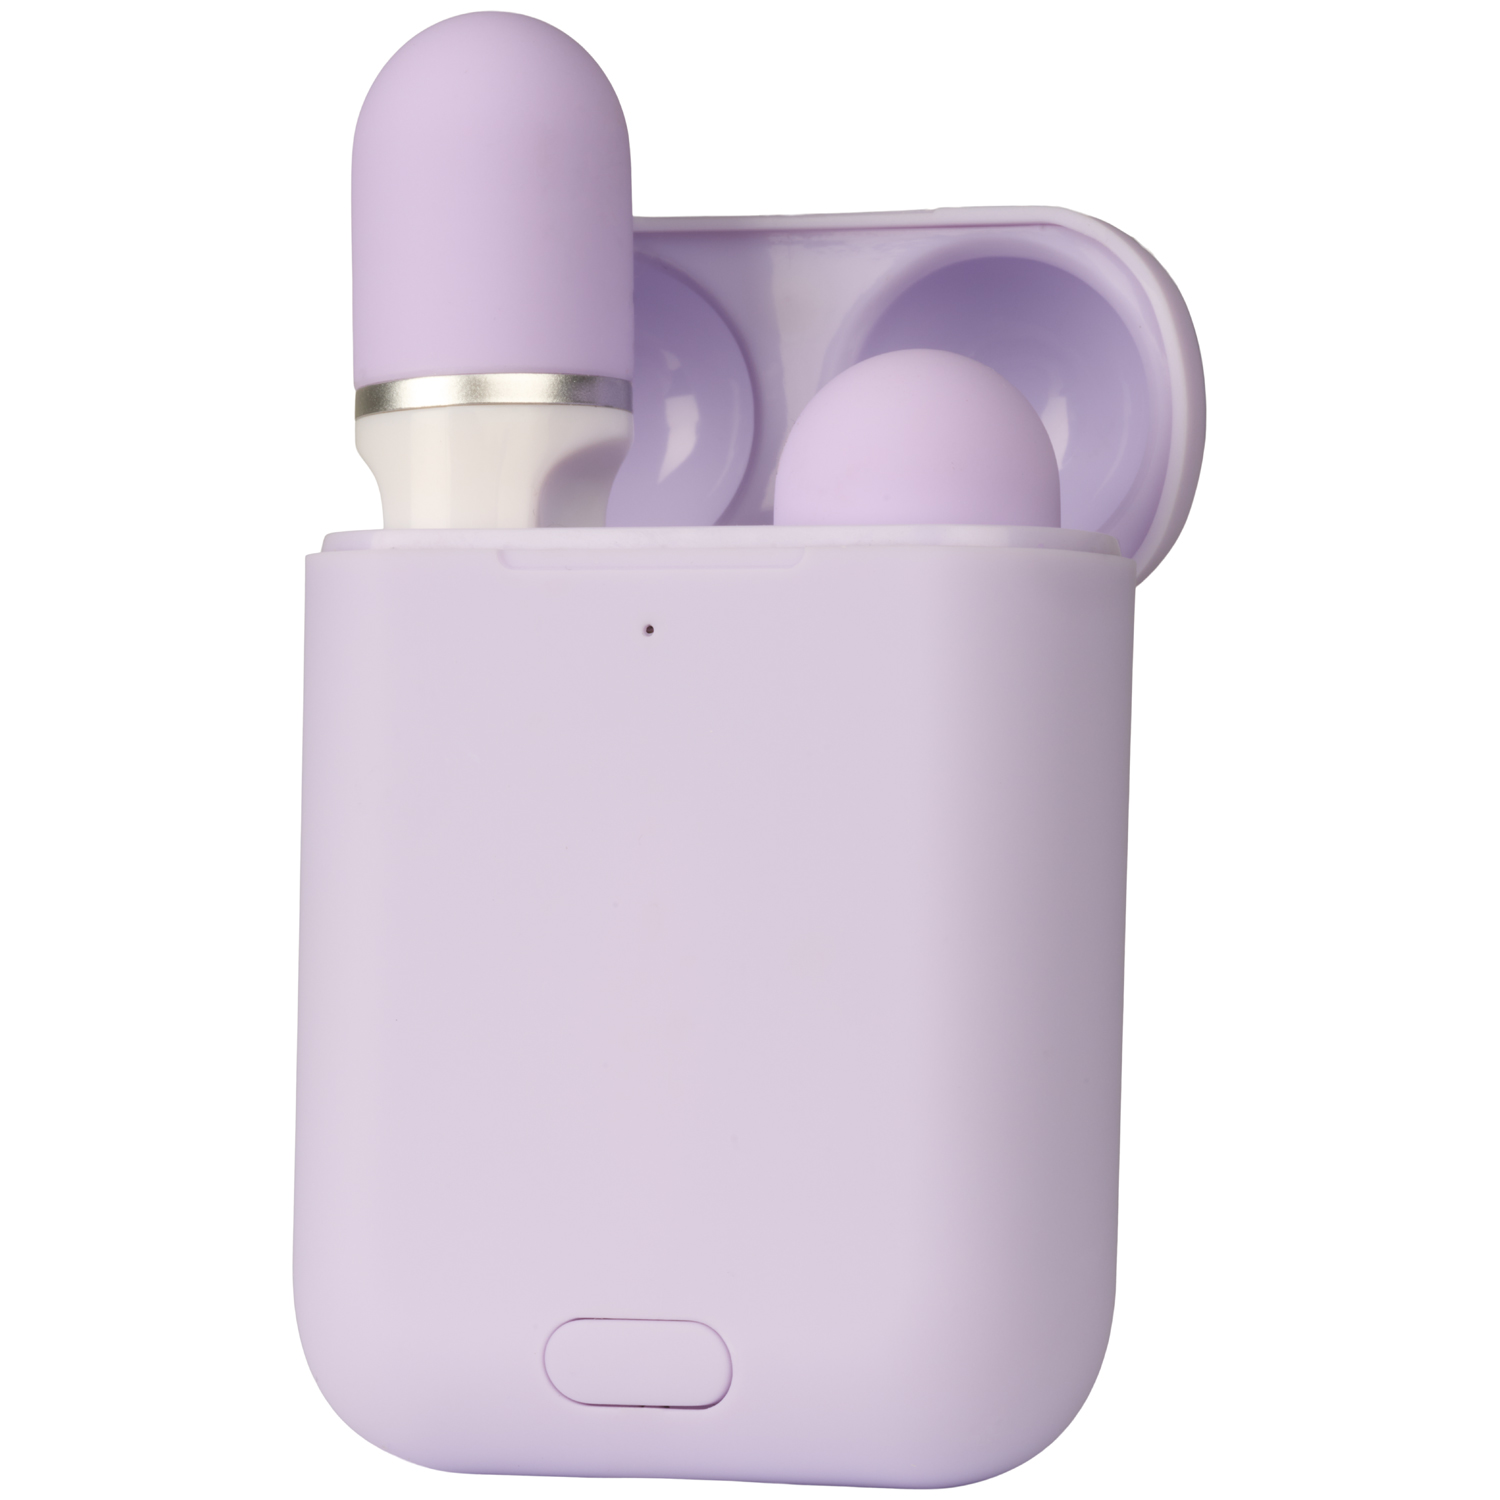 JimmyJane Hello Touch Pro Vibrerende Rejse Massagers - Lilla